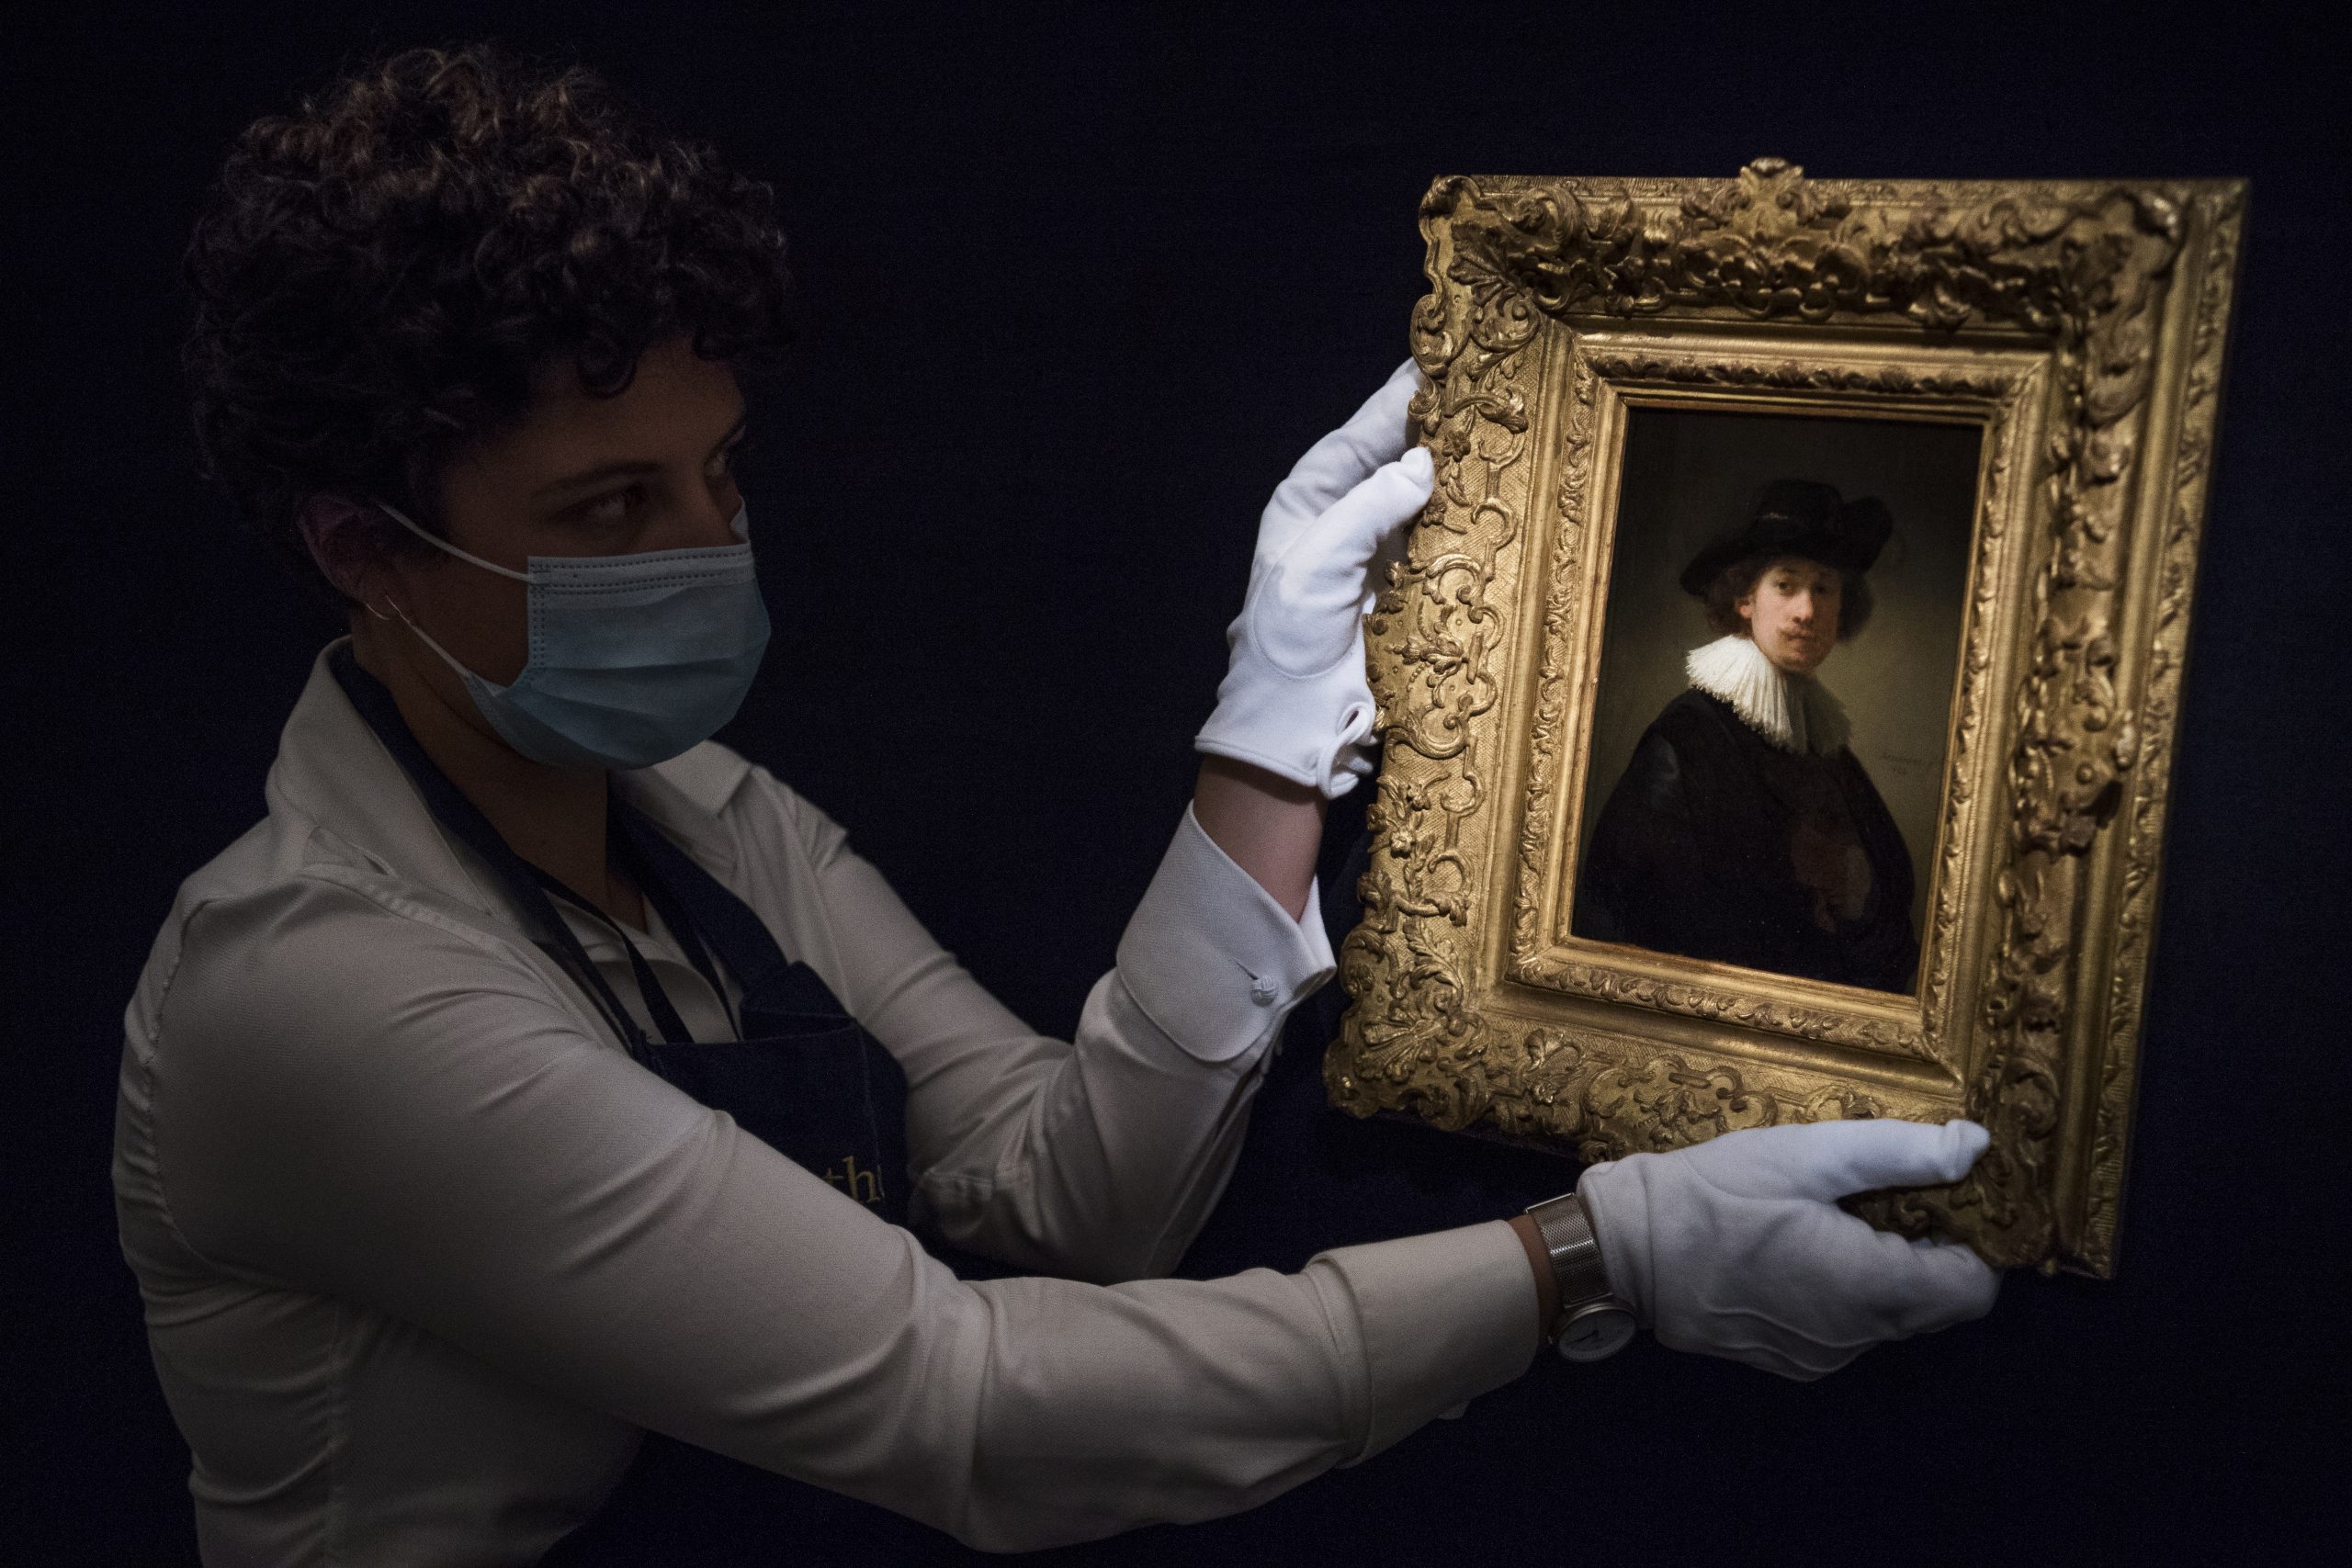 epa08563615 A worker poses with 'Self-portrait, wearing a ruff and black hat' by Dutch artist Rembrandt Van Rijn at the 'Rembrandt to Richter' art sale at Sotheby's auction house in London, Britain, 23 July 2020 (issued 24 July 2020). Works from Old Masters, Impressionist & Modern Art, Modern & Post-War British Art are on display at Sotheby's London ahead of a one-off auction on July 28.  EPA/NEIL HALL